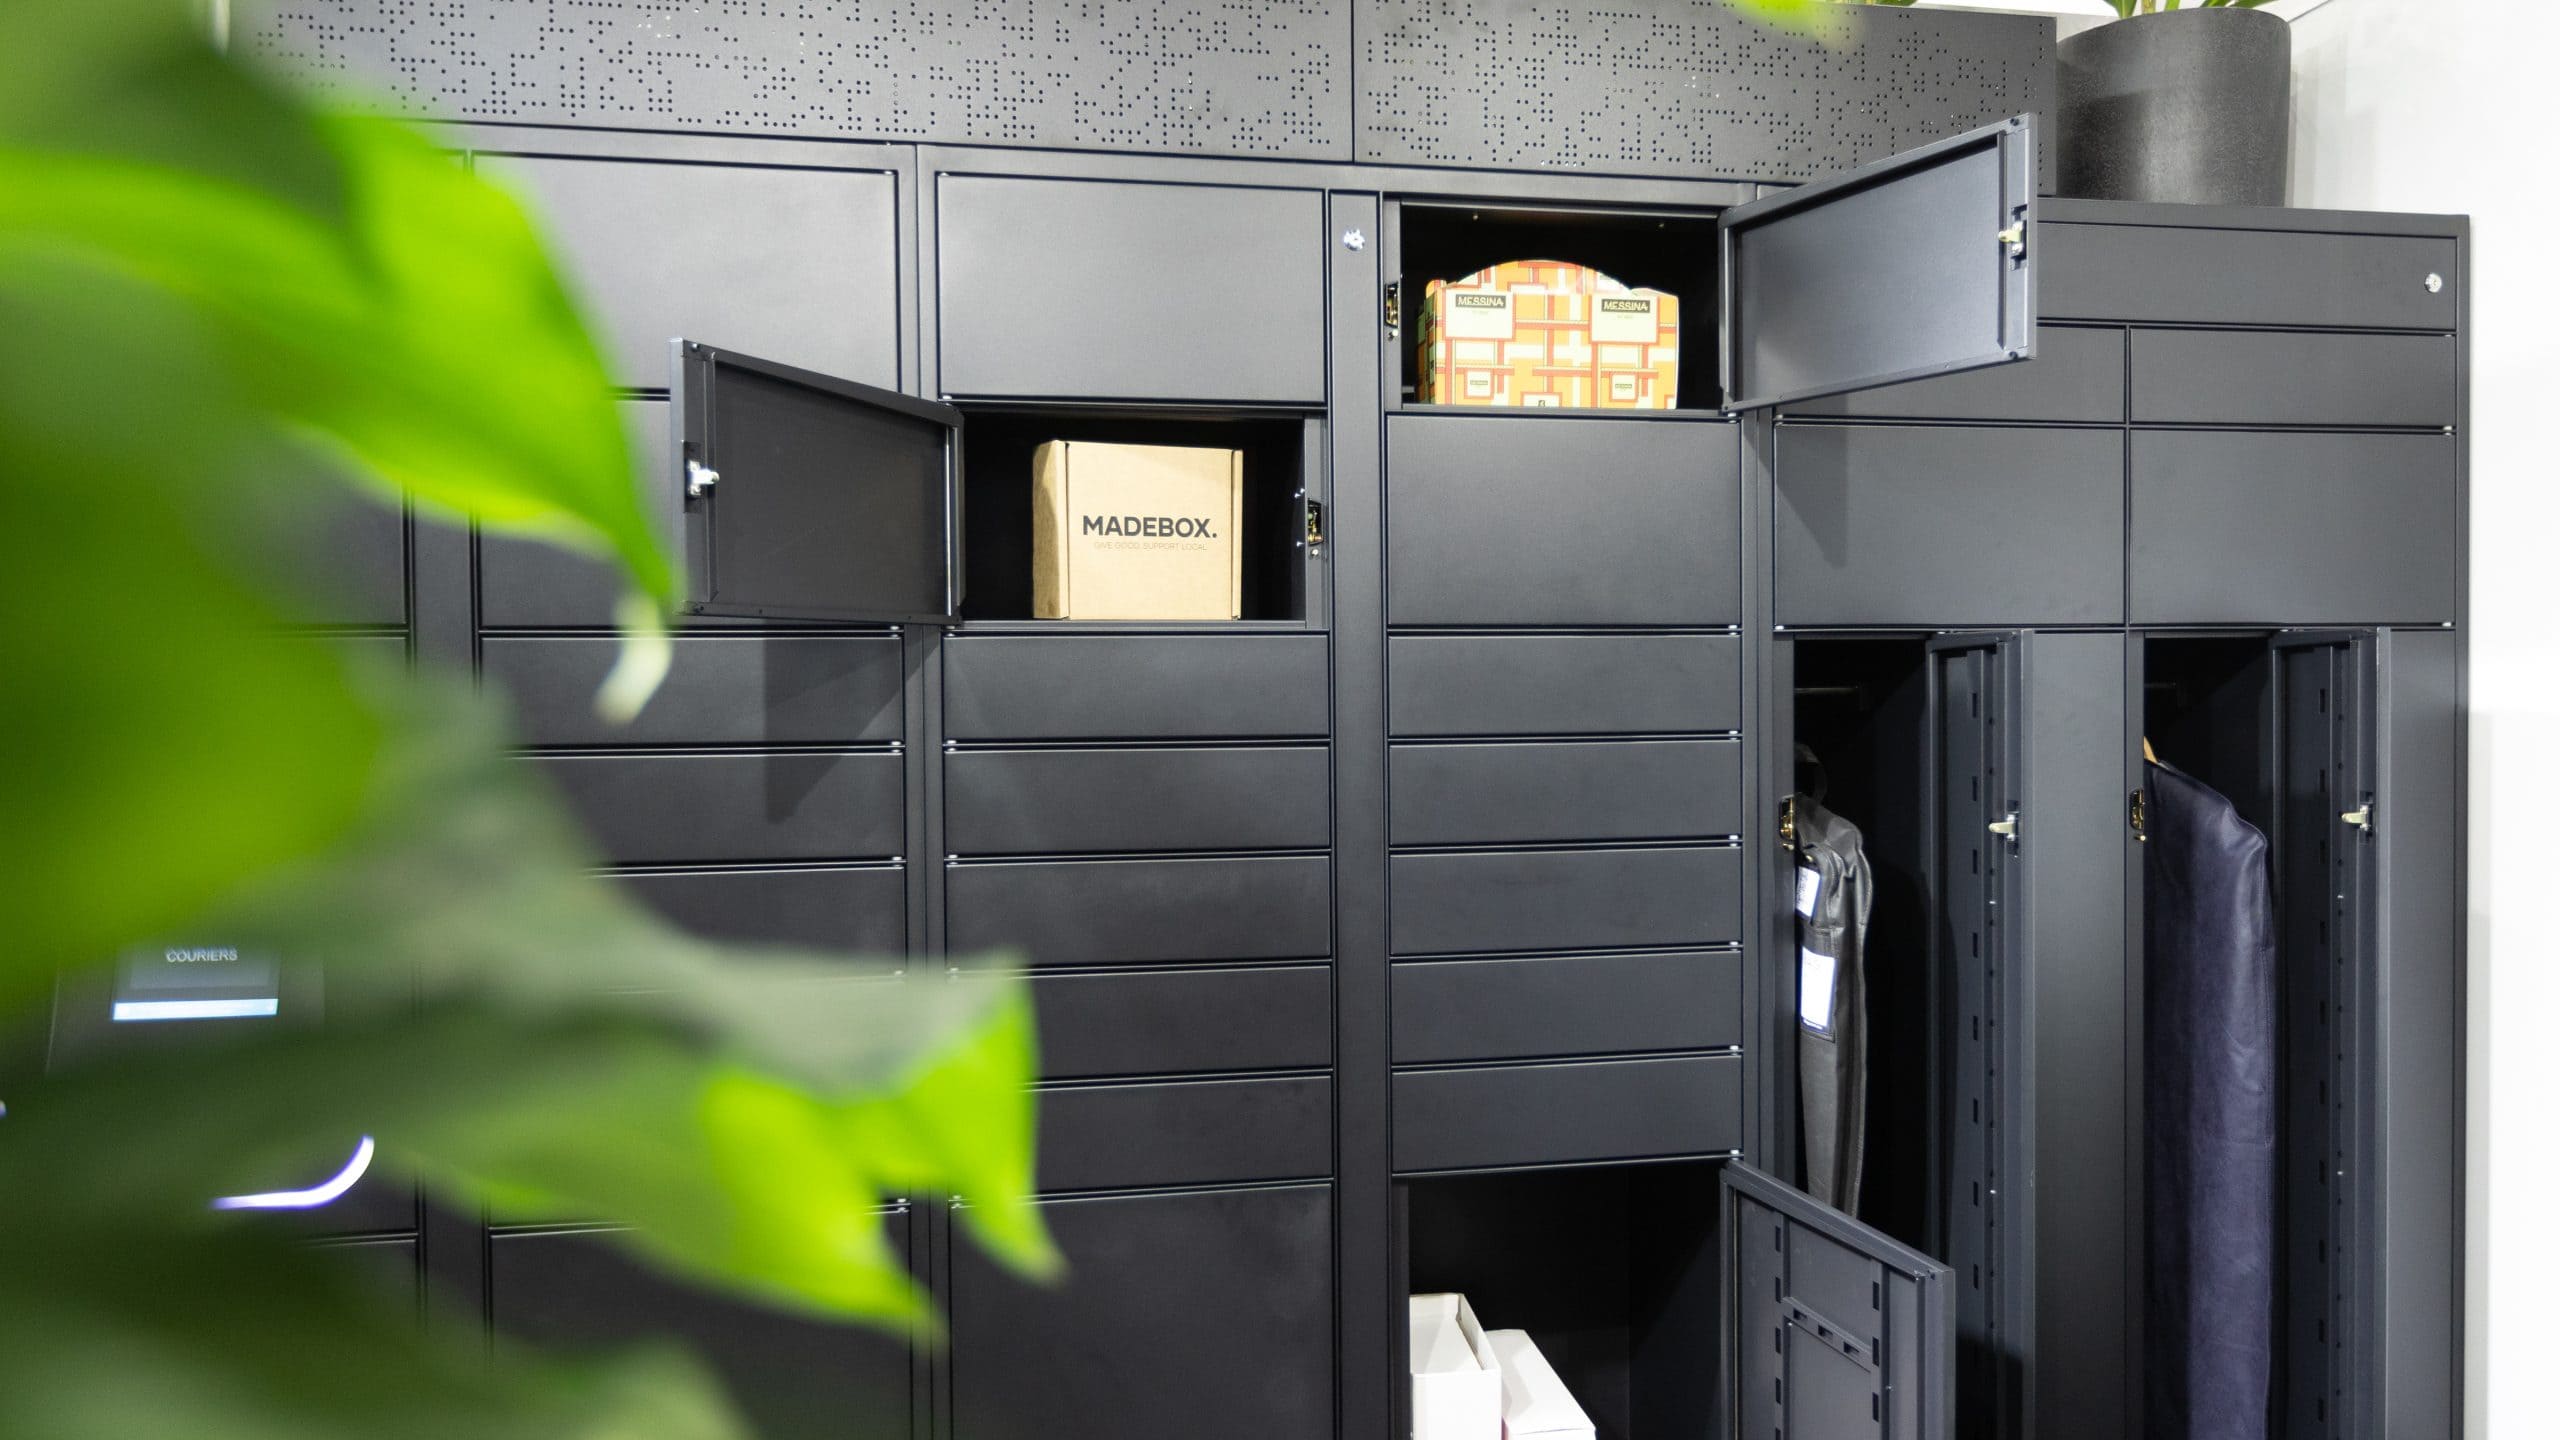 parcel lockers, dry cleaning lockers and food delivery lockers inside